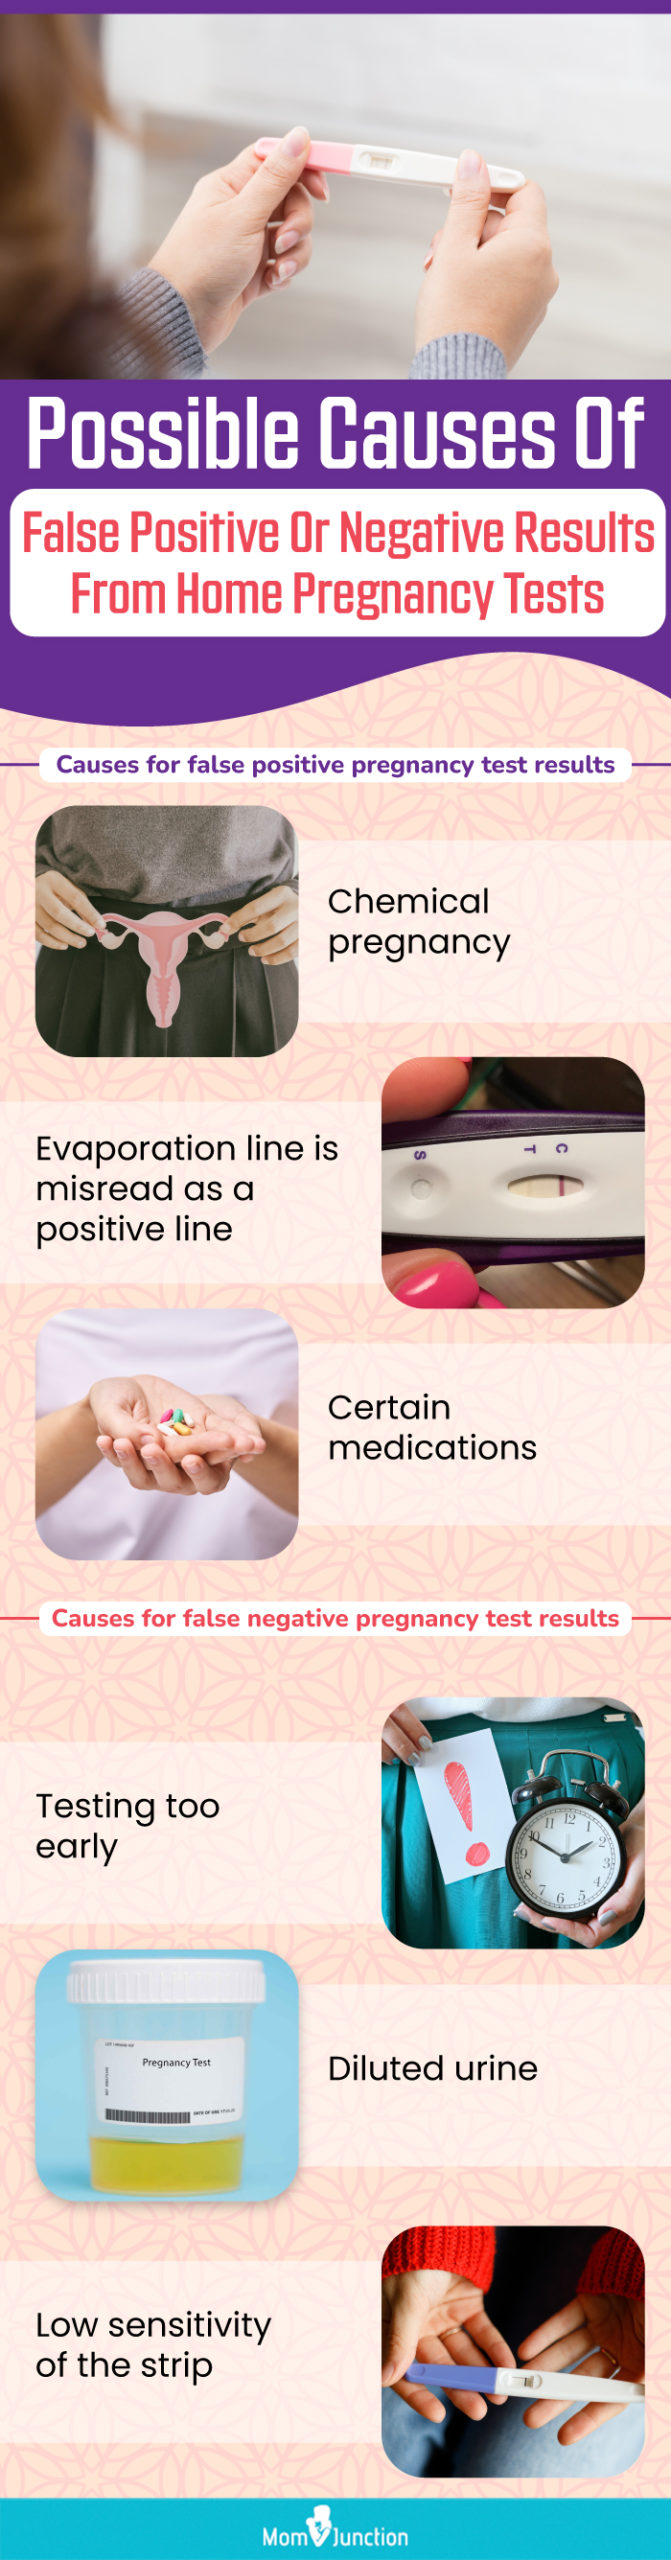 possible causes of false positive or negative results from home pregnancy tests (infographic)